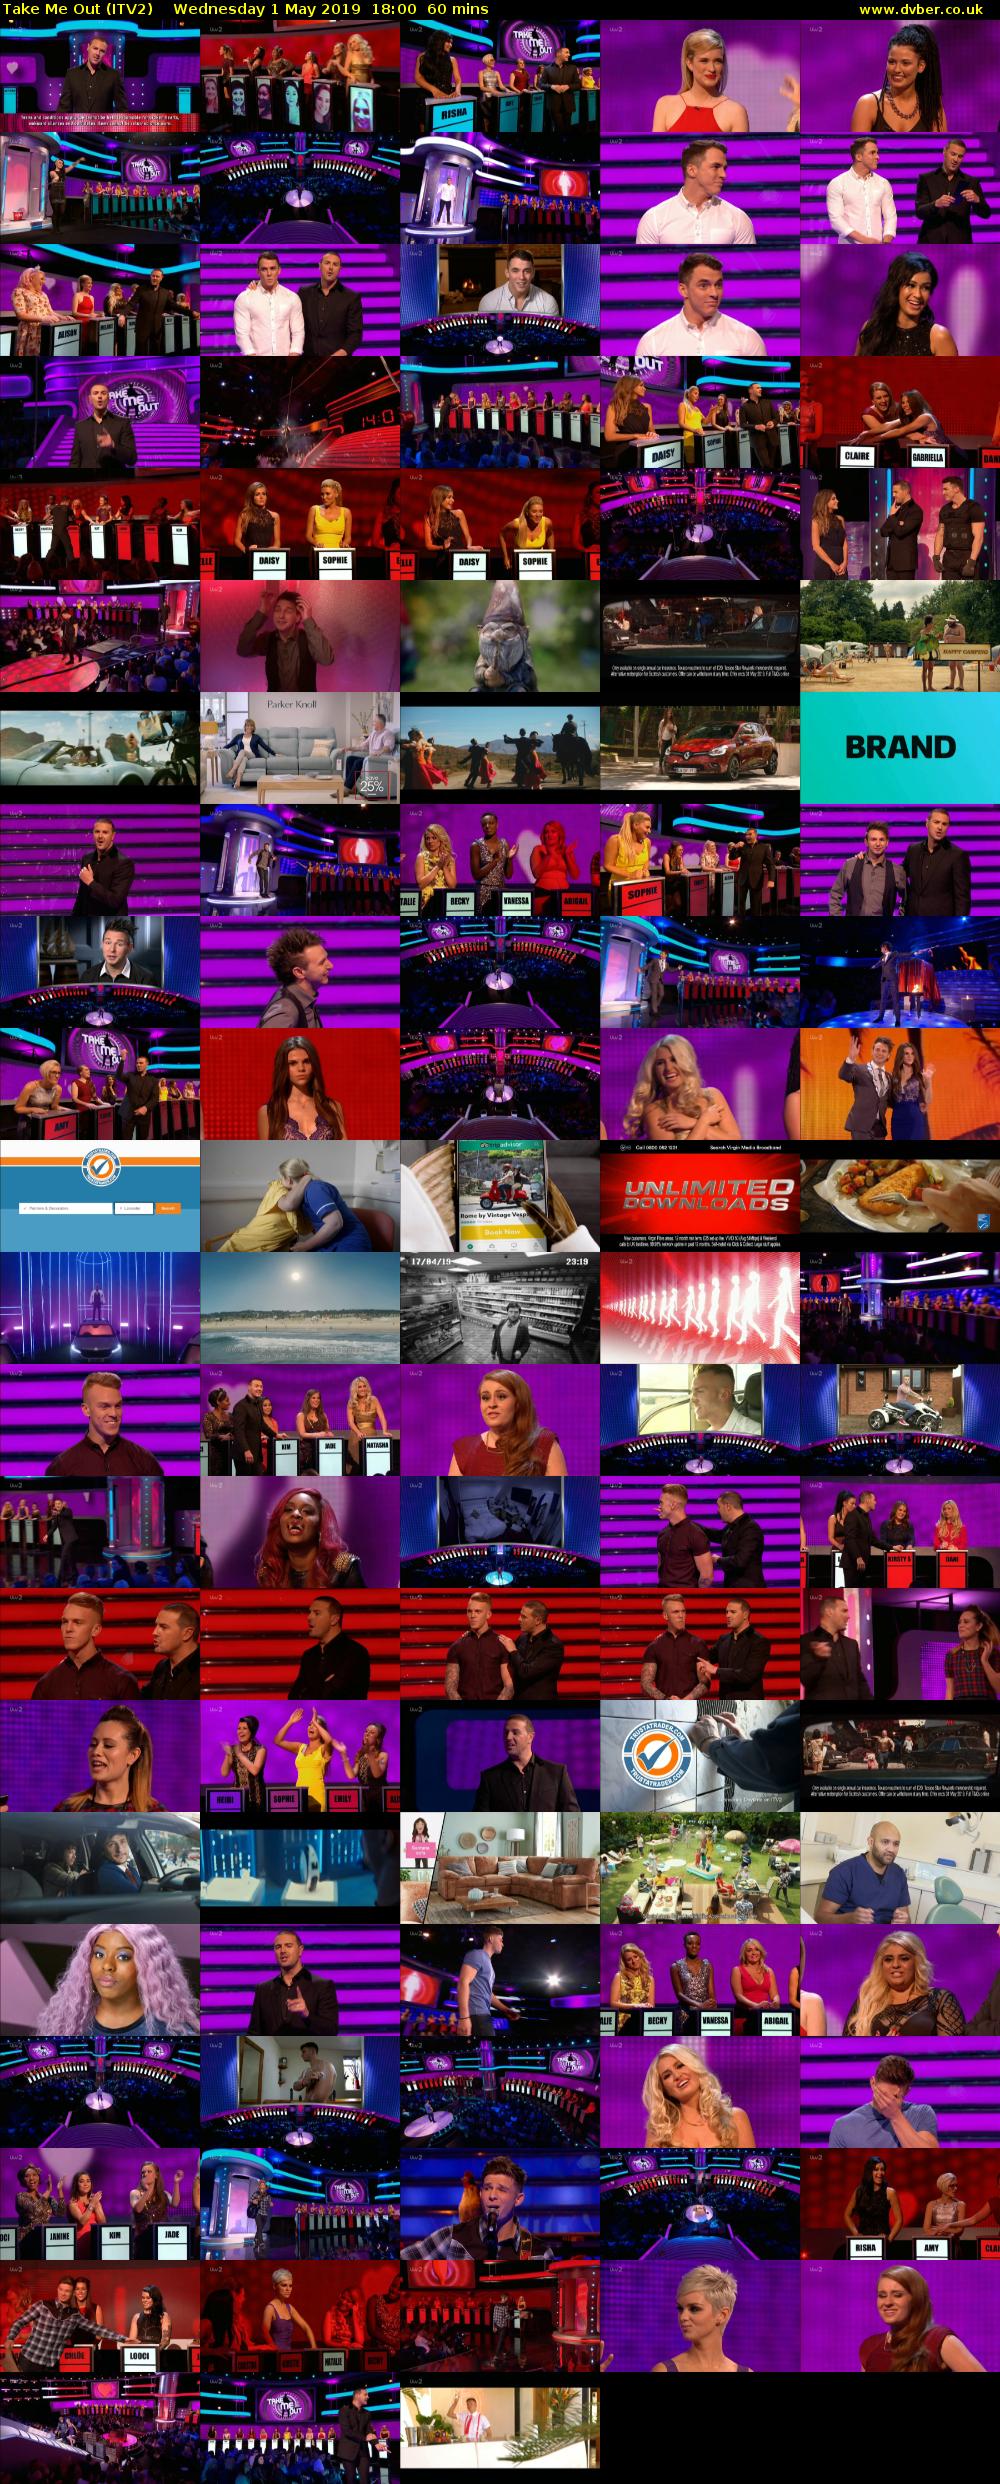 Take Me Out (ITV2) Wednesday 1 May 2019 18:00 - 19:00